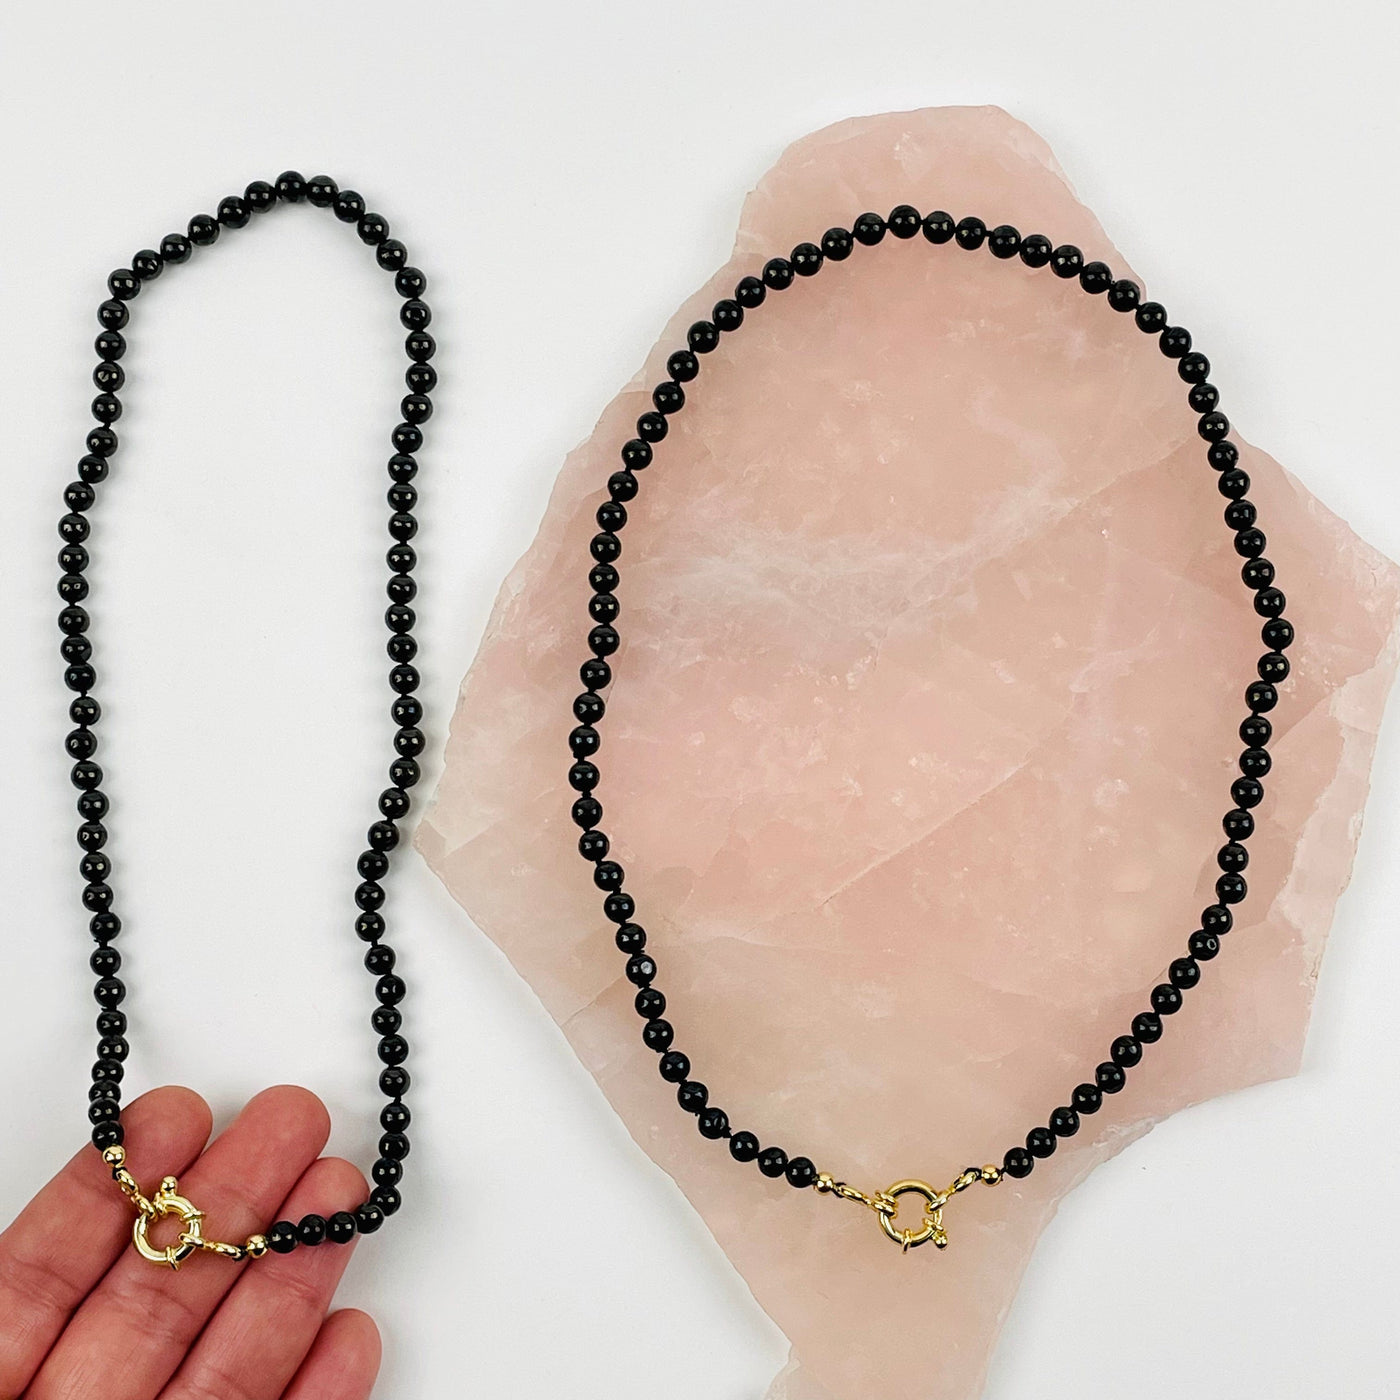 hand holding Shungite Candy Necklace with another on a rose quartz platter